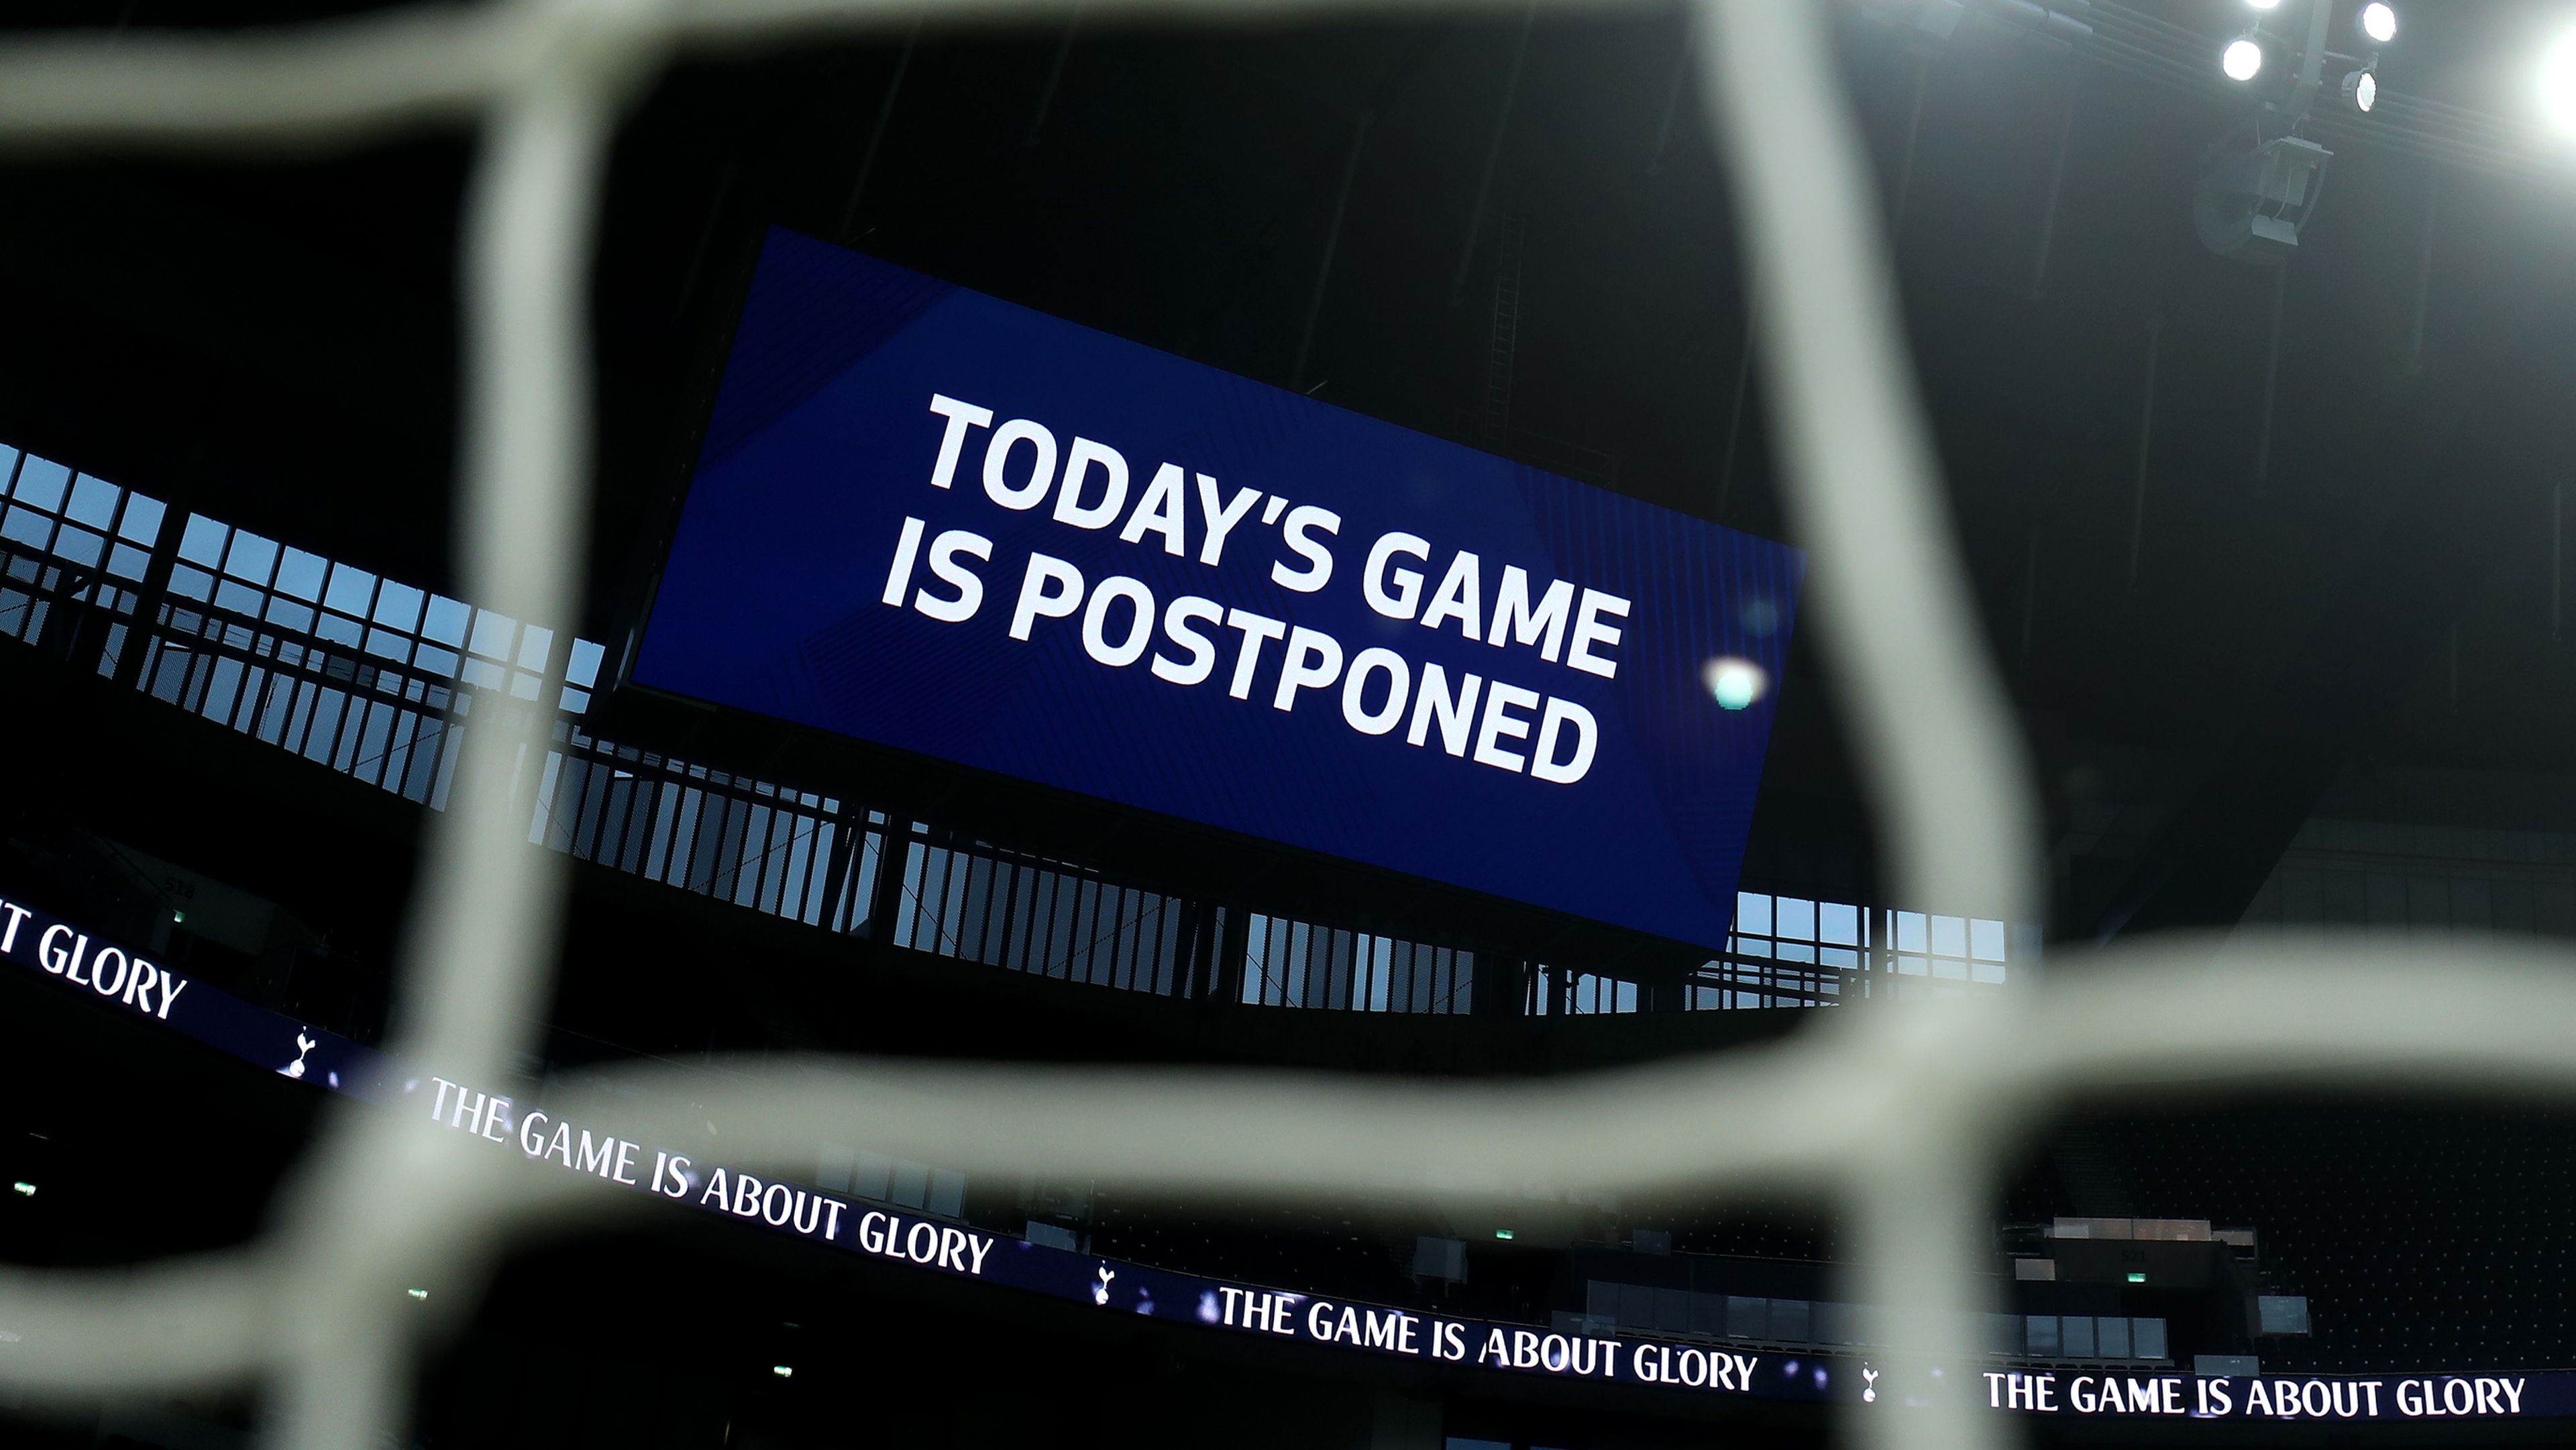 A board inside the stadium displays &#x27;Today&#x27;s Game is Postponed.&#x27;